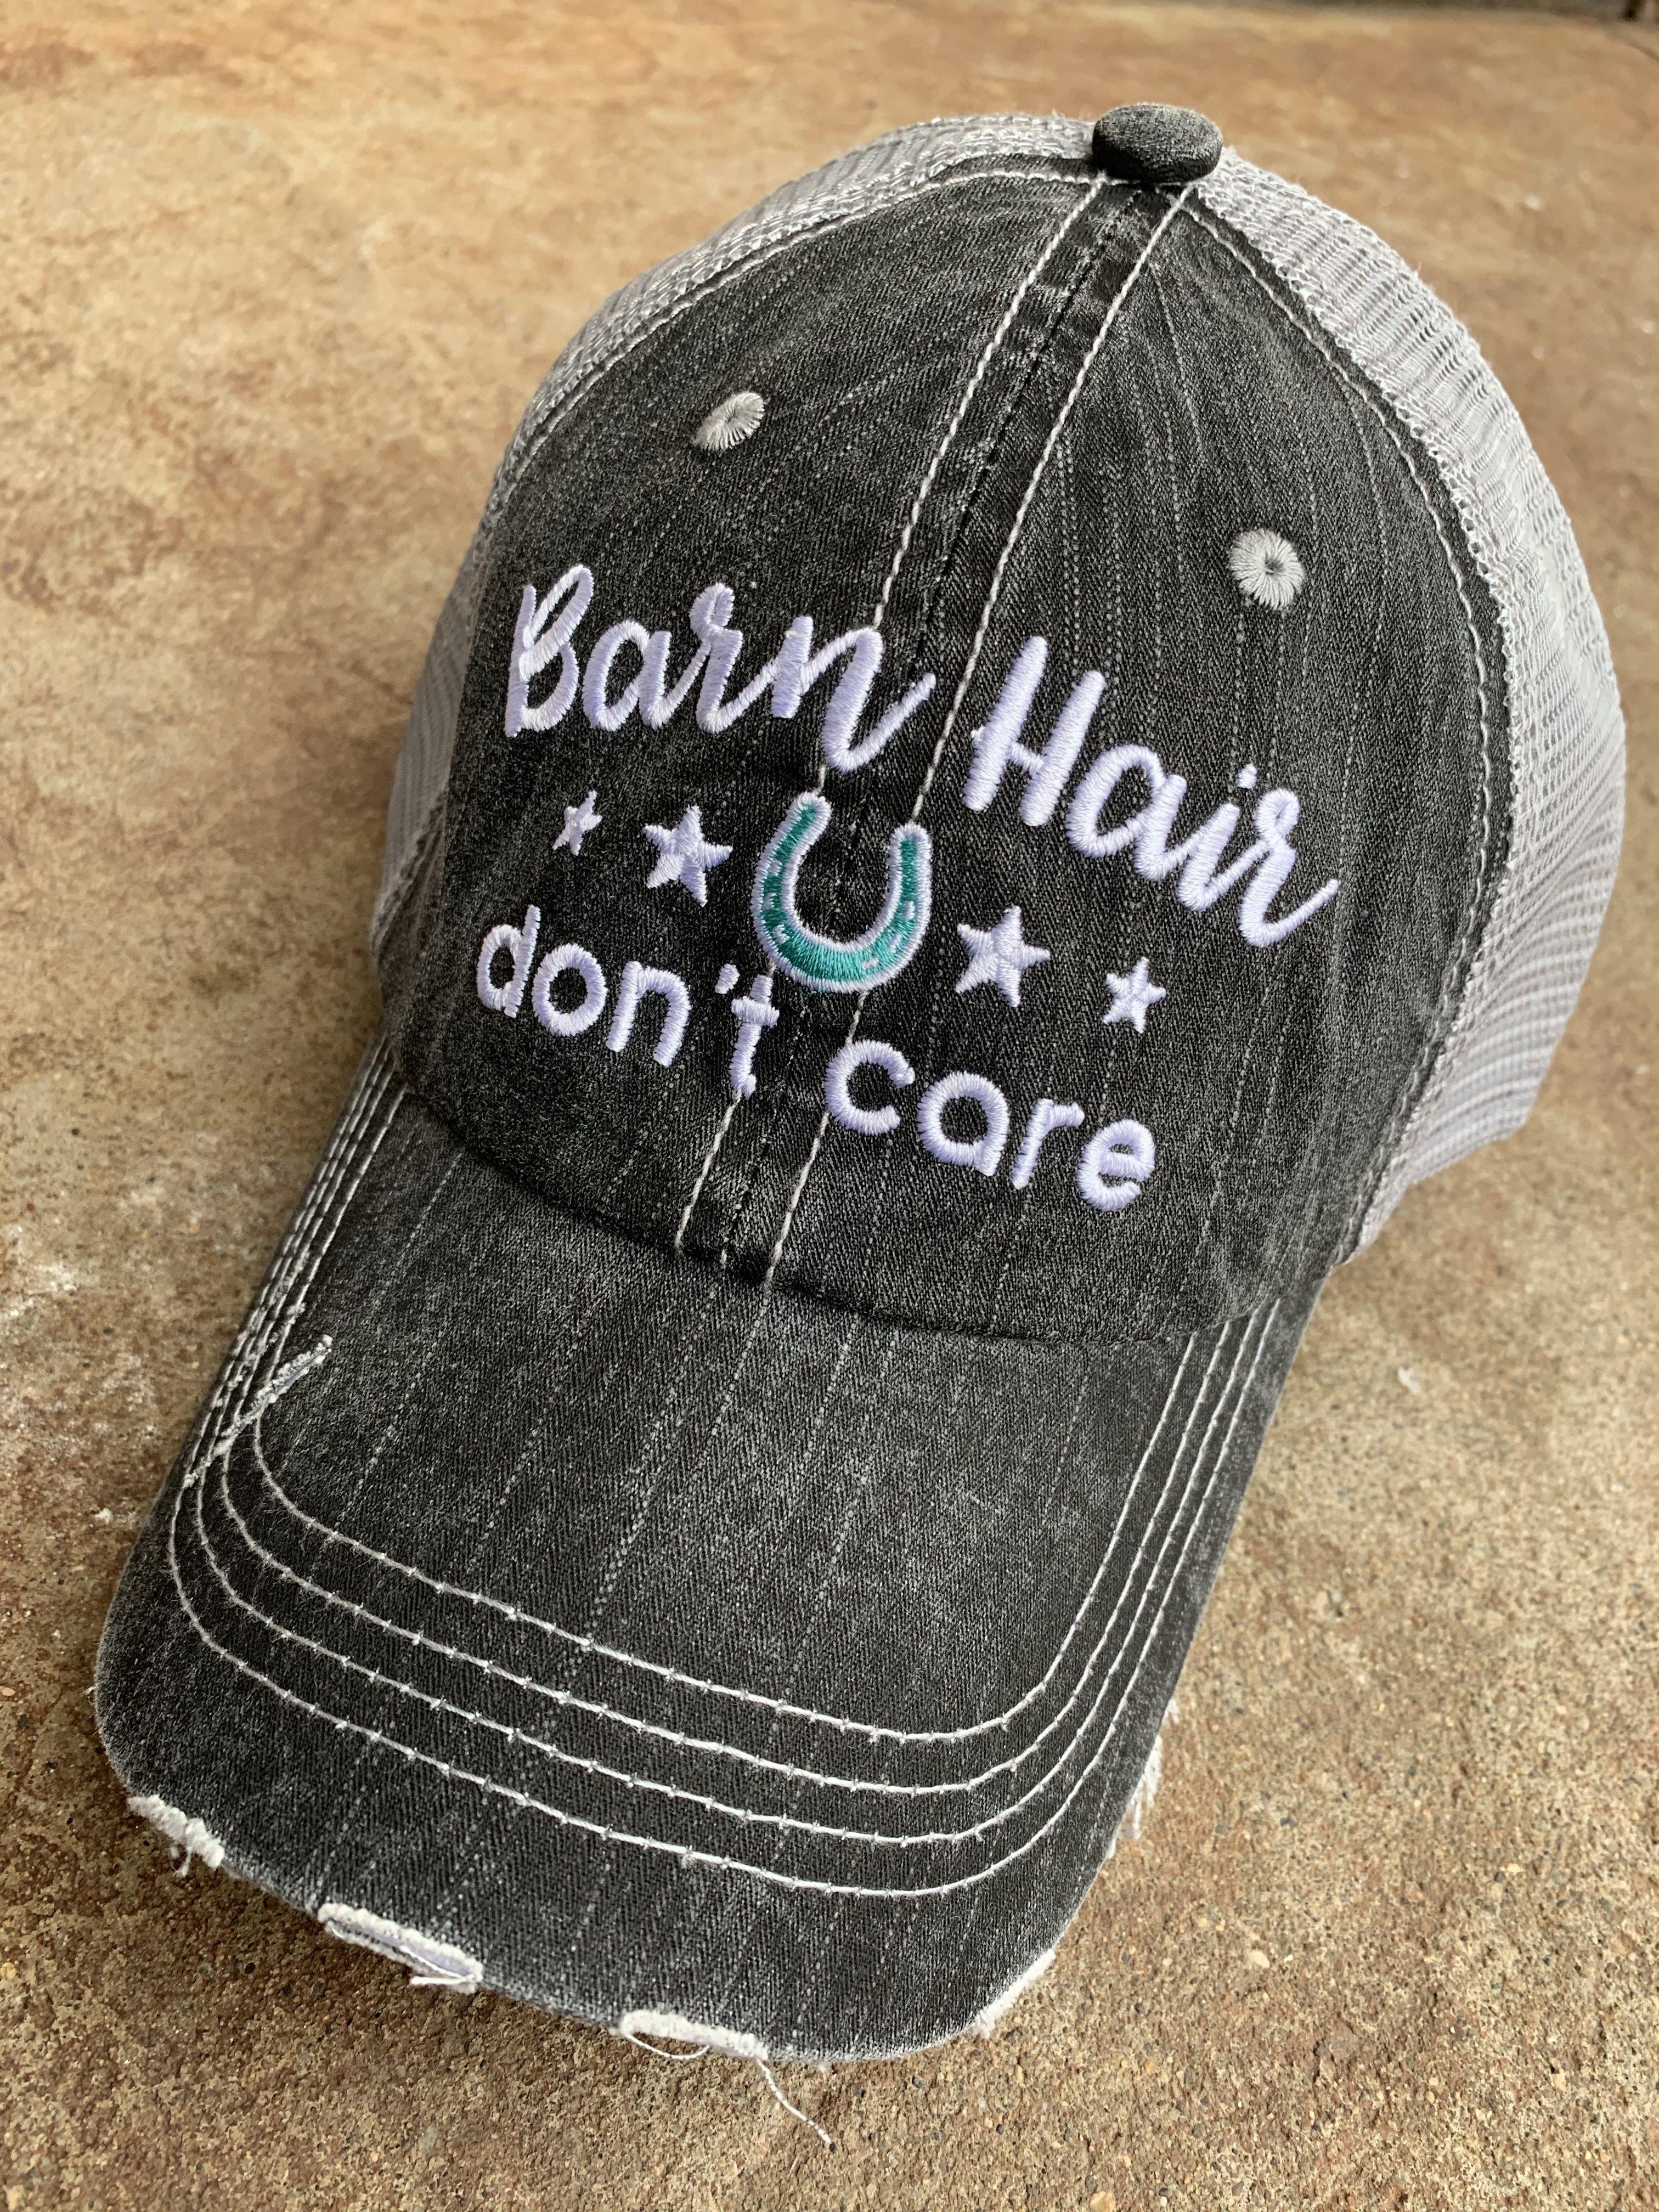 Personalized Barn Hats Barn hair dont care Personalize TEAL PINK